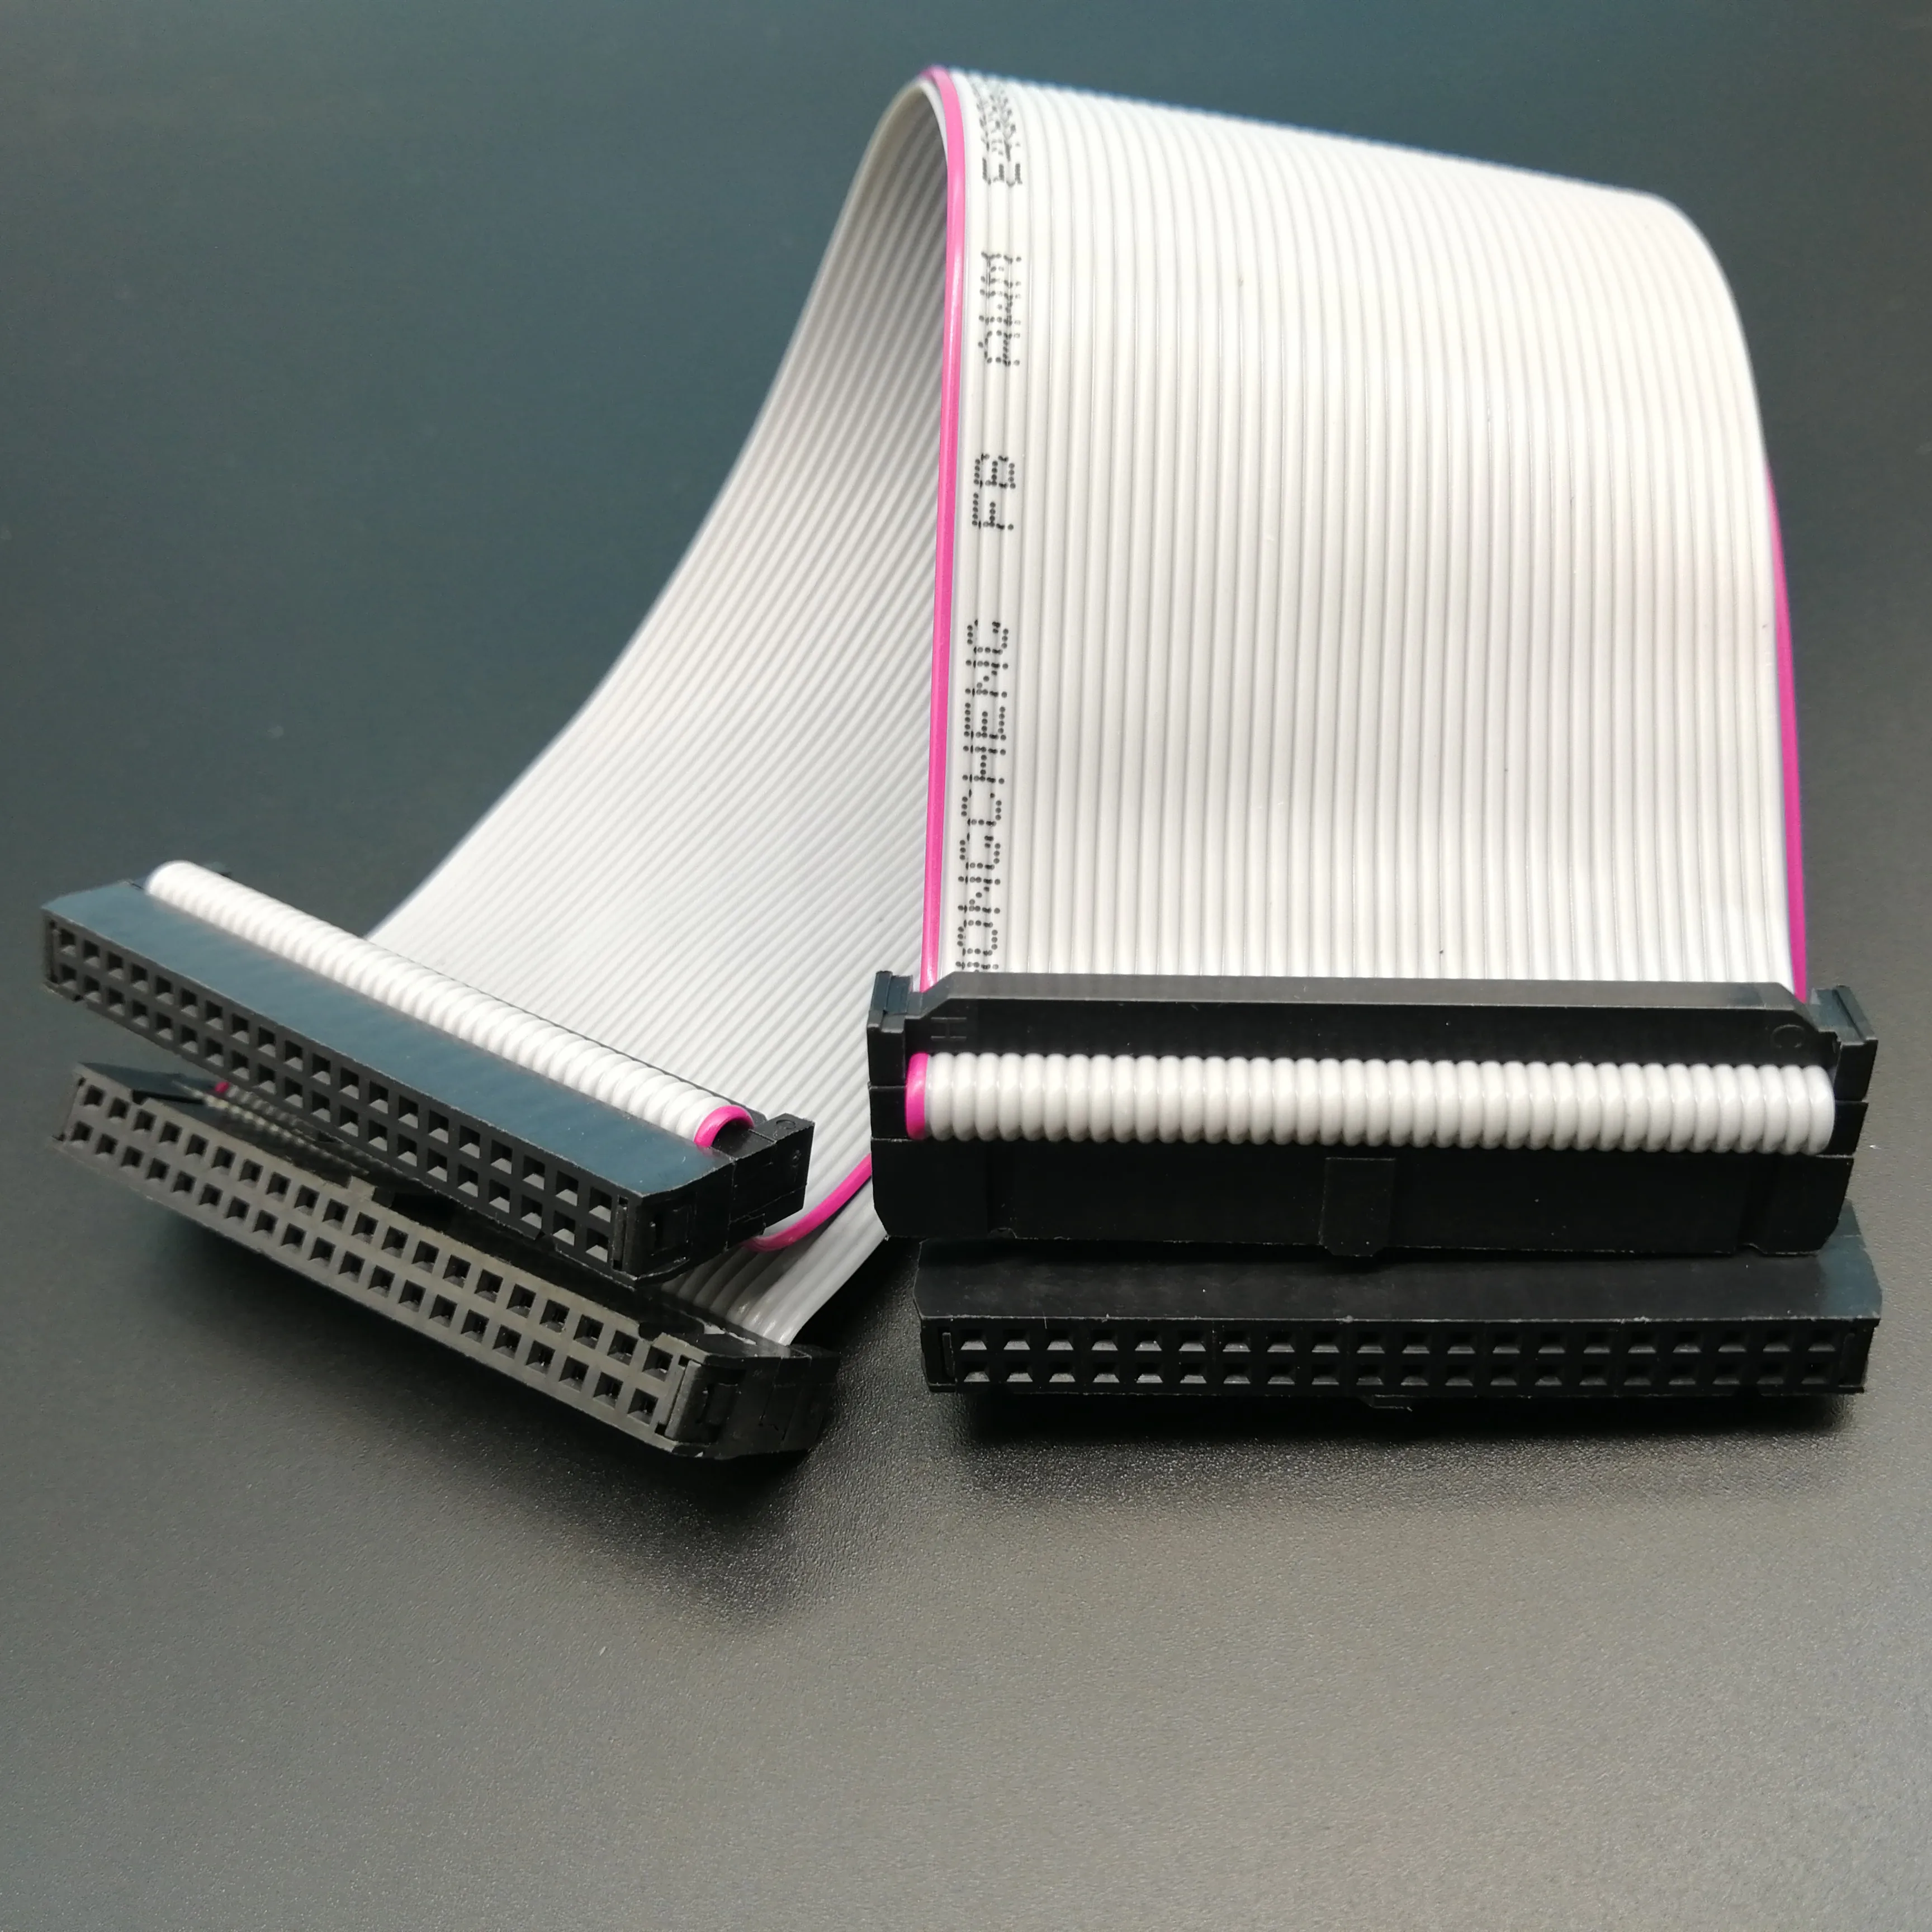 26 AWG 26 and 28 AWG 28 Flat Ribbon Cable and IDC Socket Current Ratings  Capacity and Limits